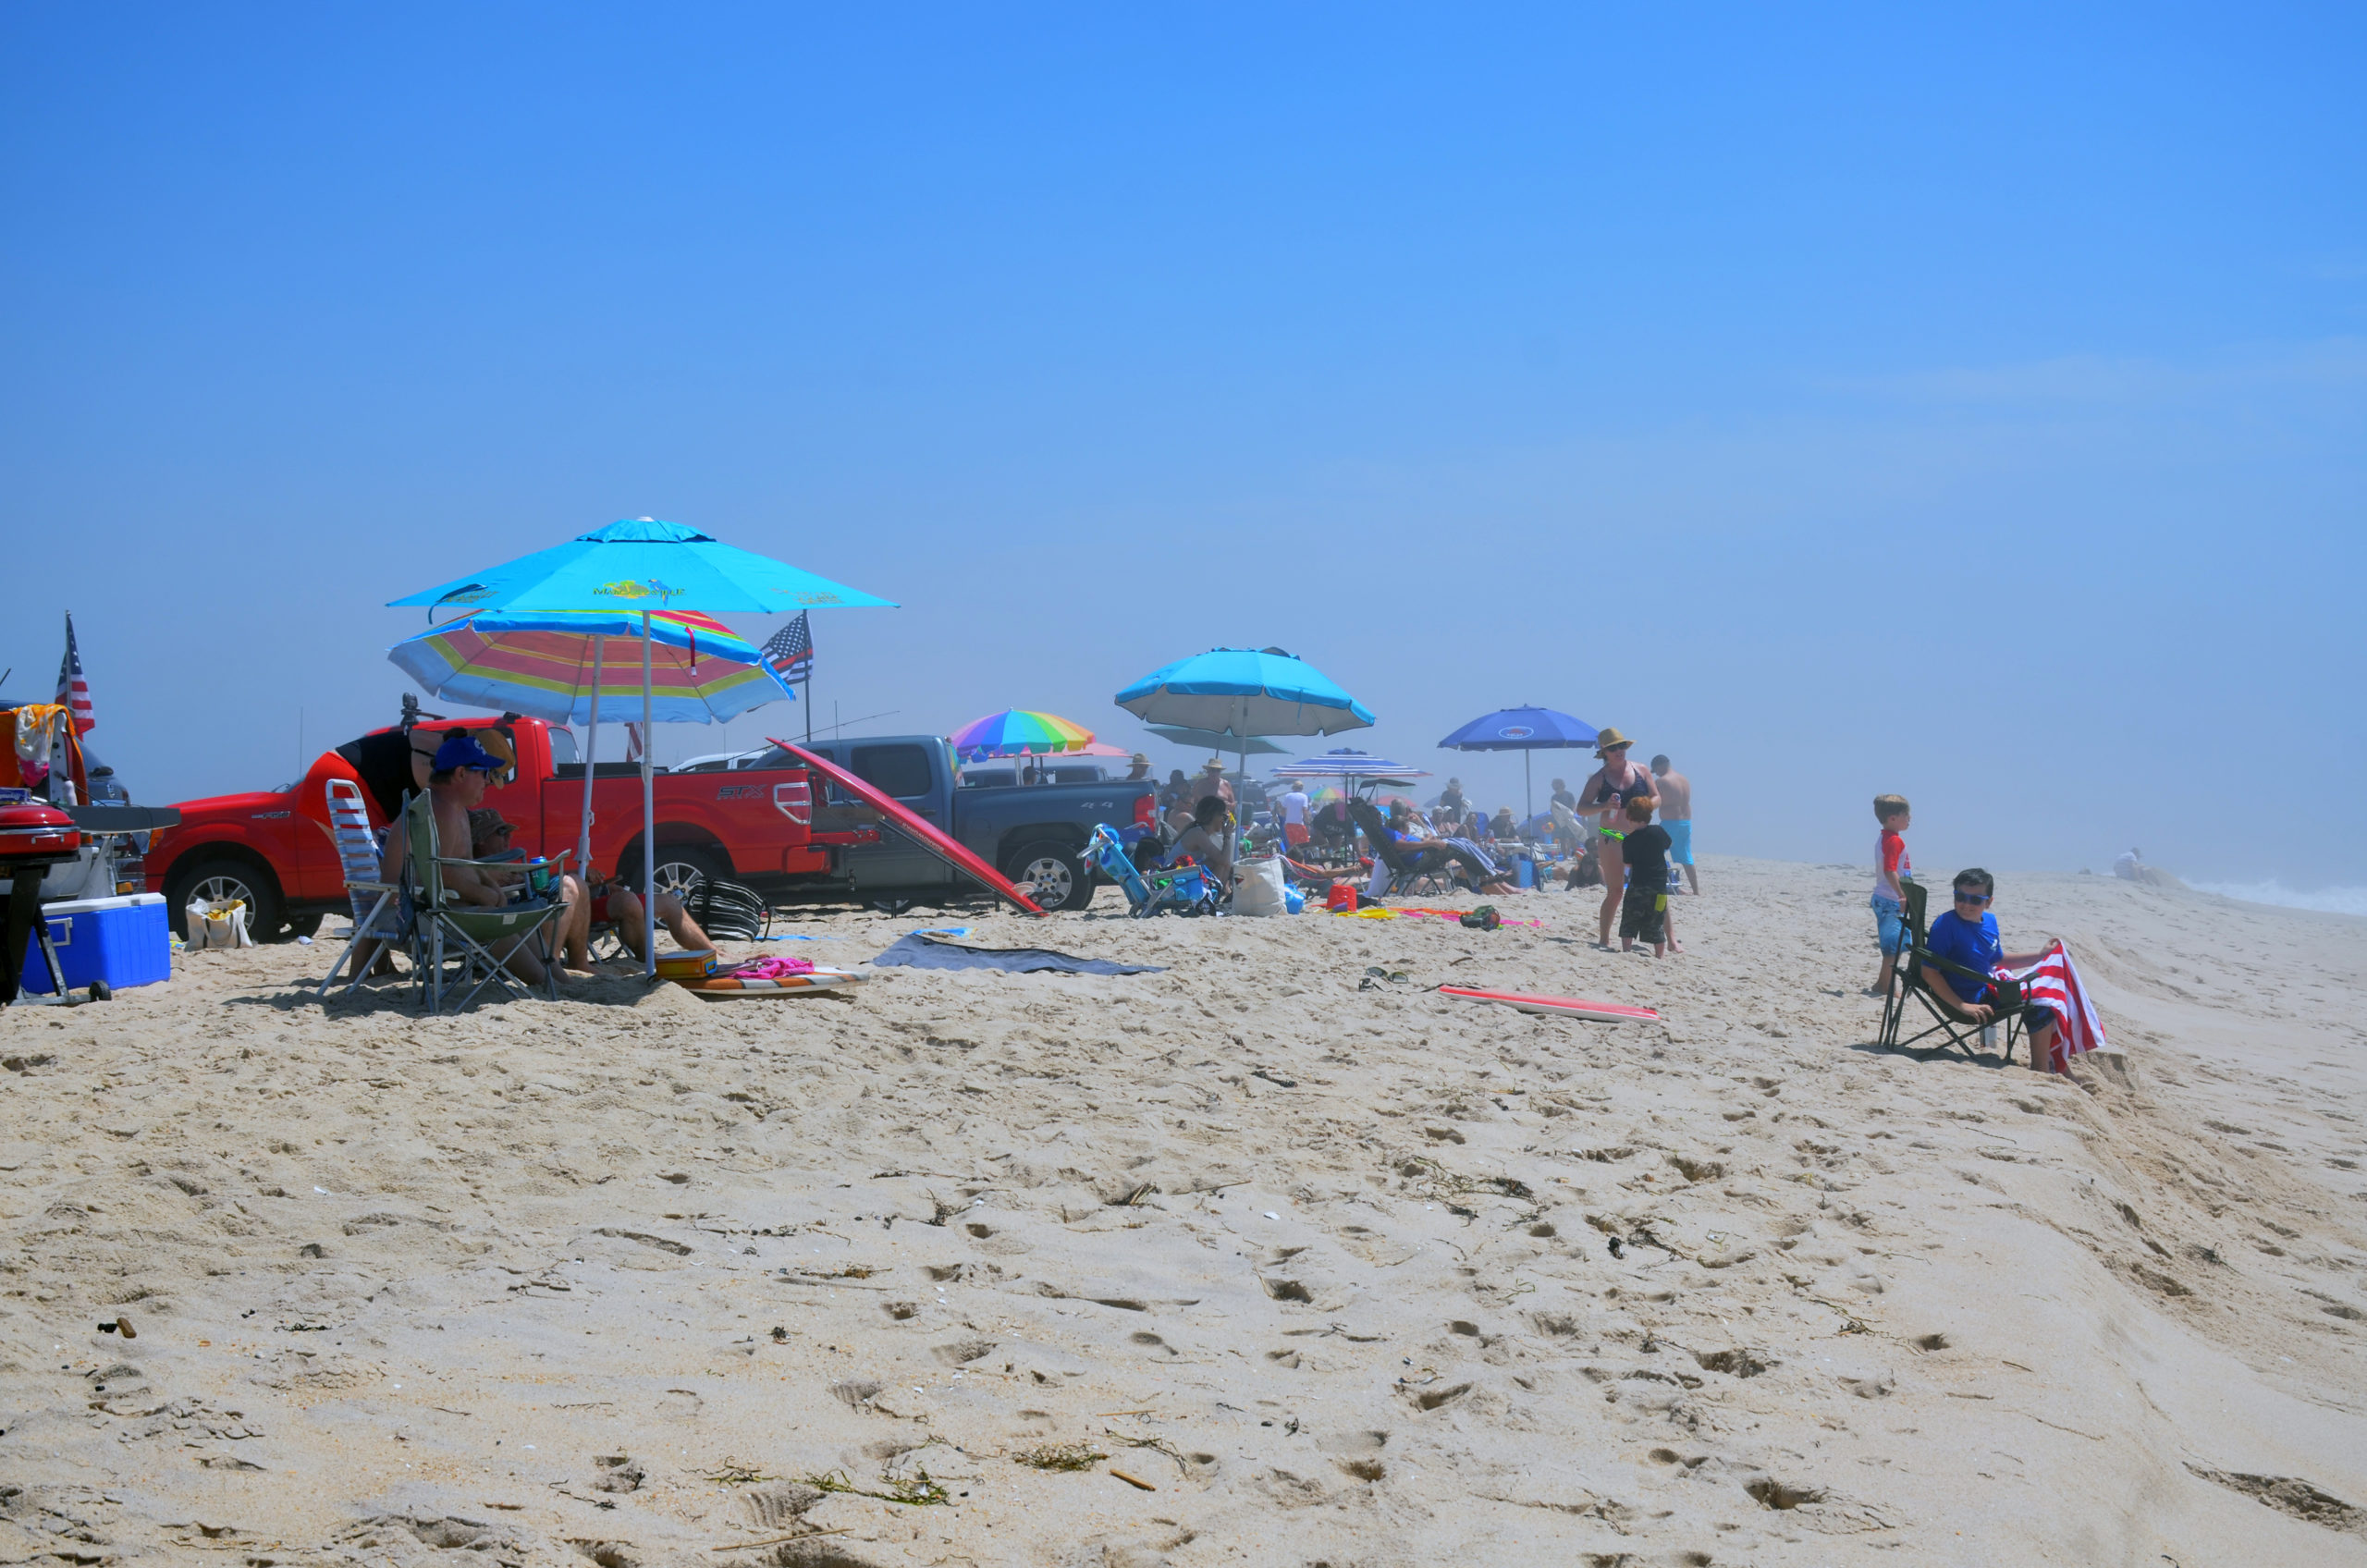 During the summer, people flock to Picnic Beach.